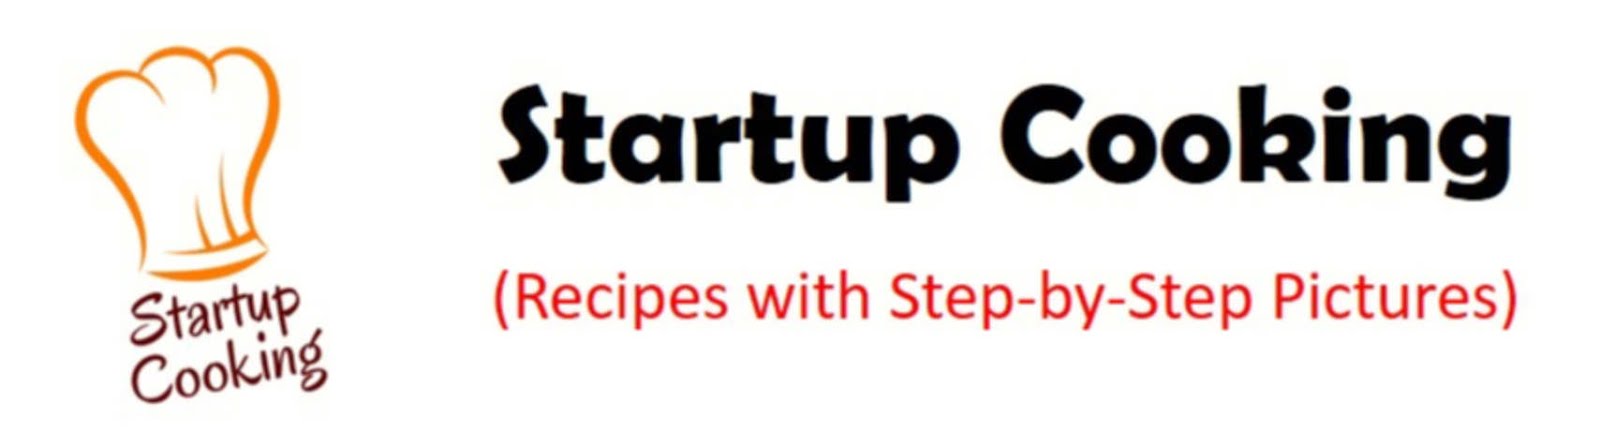 Startup Cooking